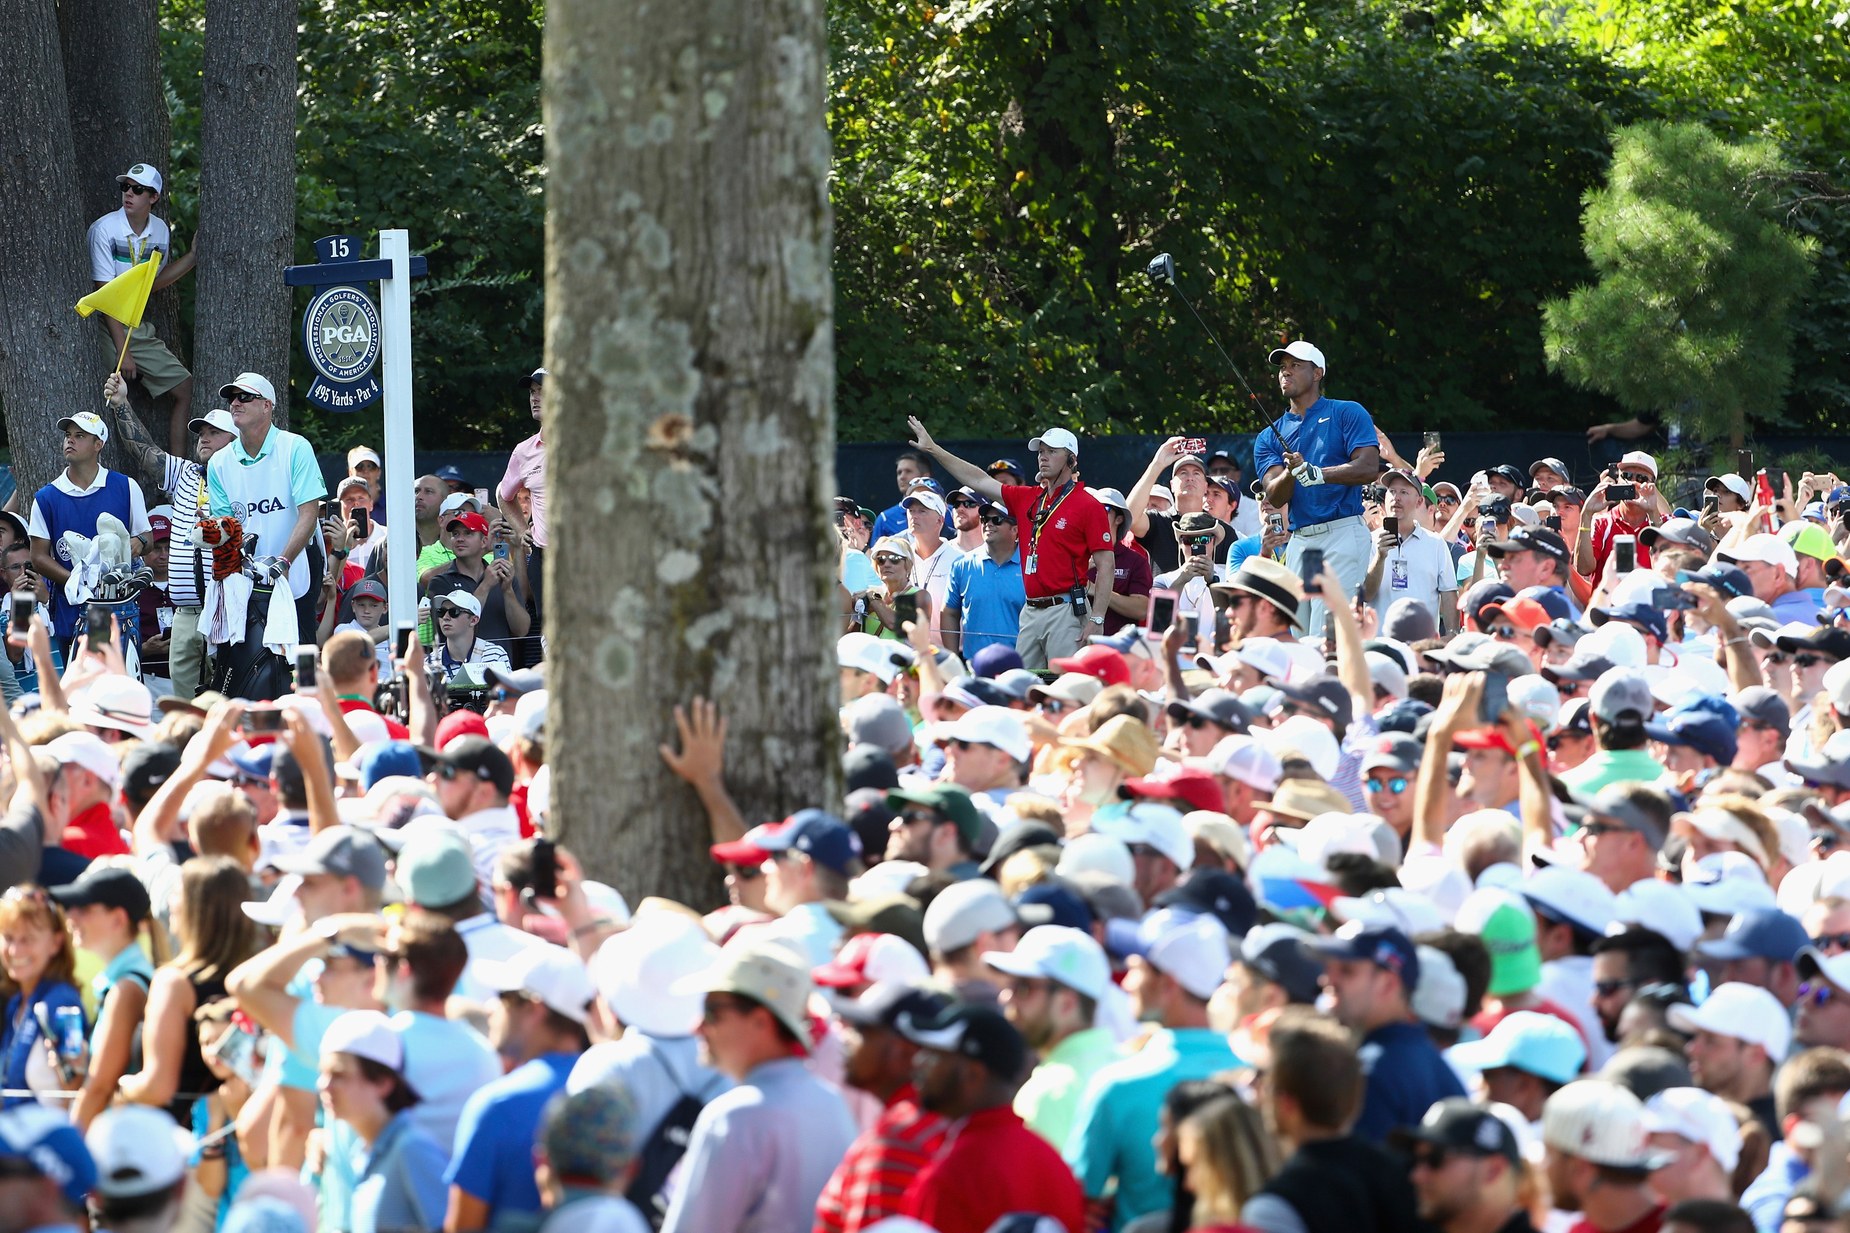 From Rahm to Rickie to, yes, Tiger, there’s a crowd chasing Brooks Koepka at Bellerive1850 x 1233